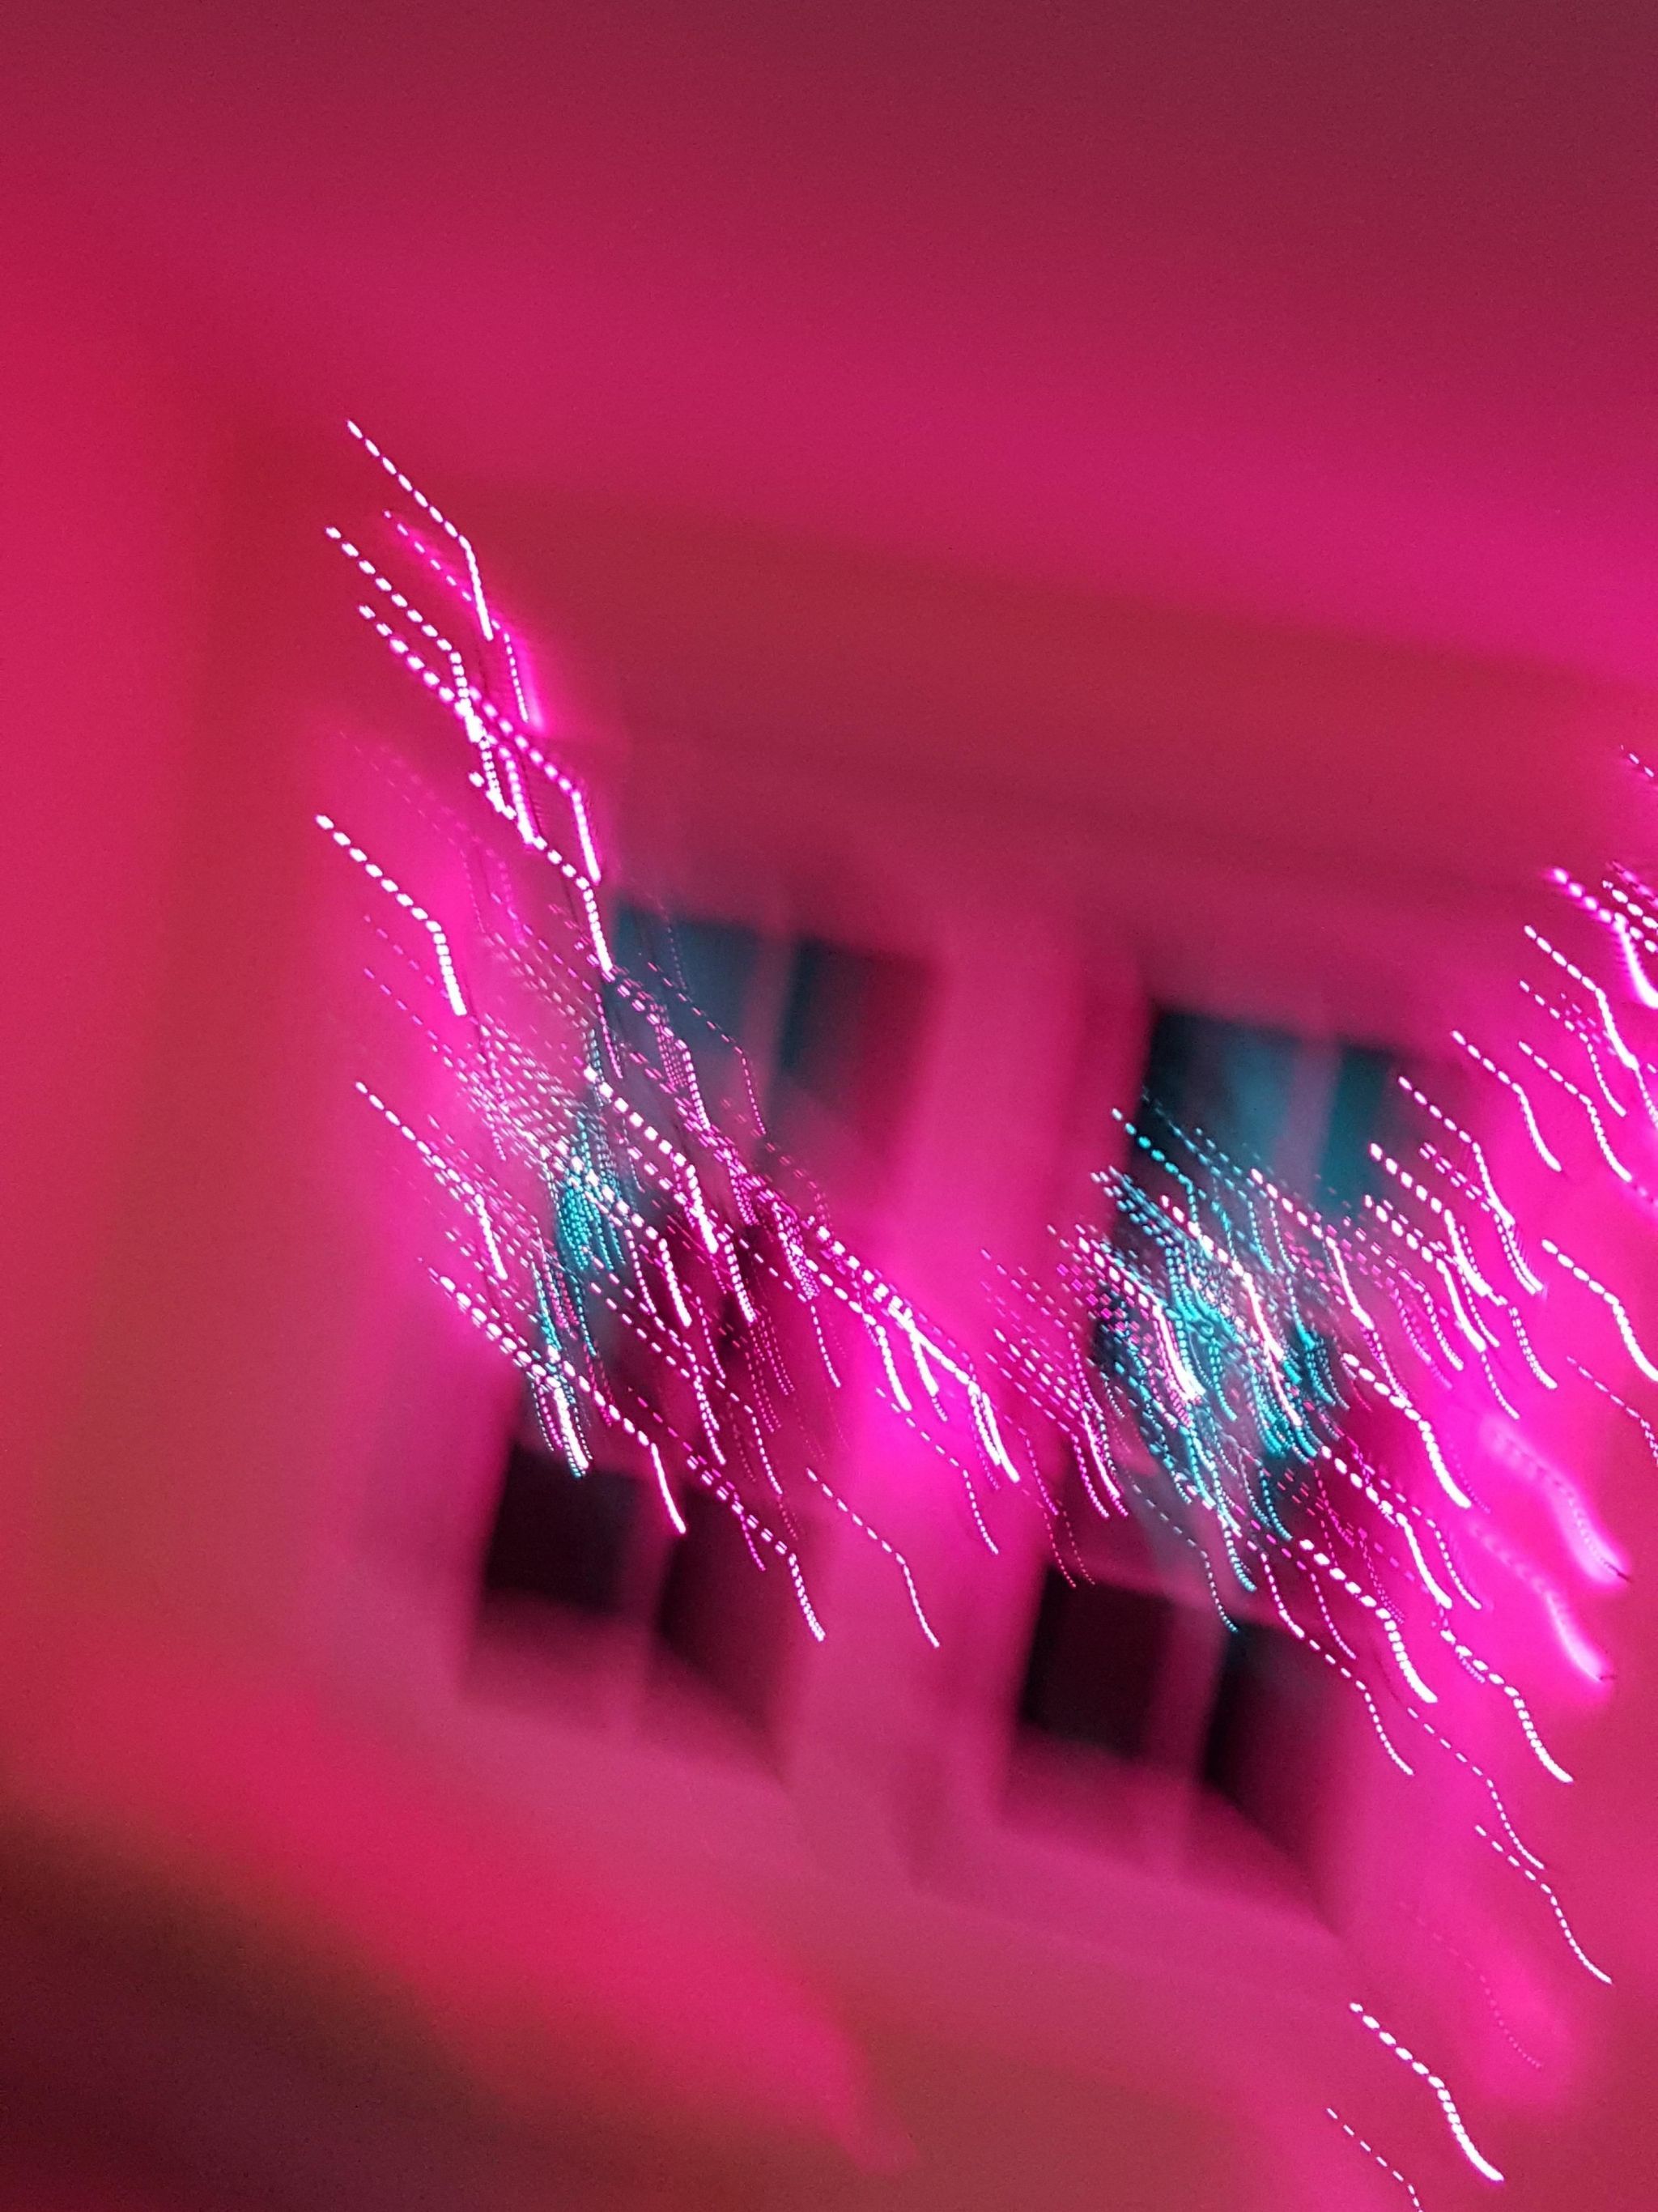 A blurry image of pink light in the window - Blurry